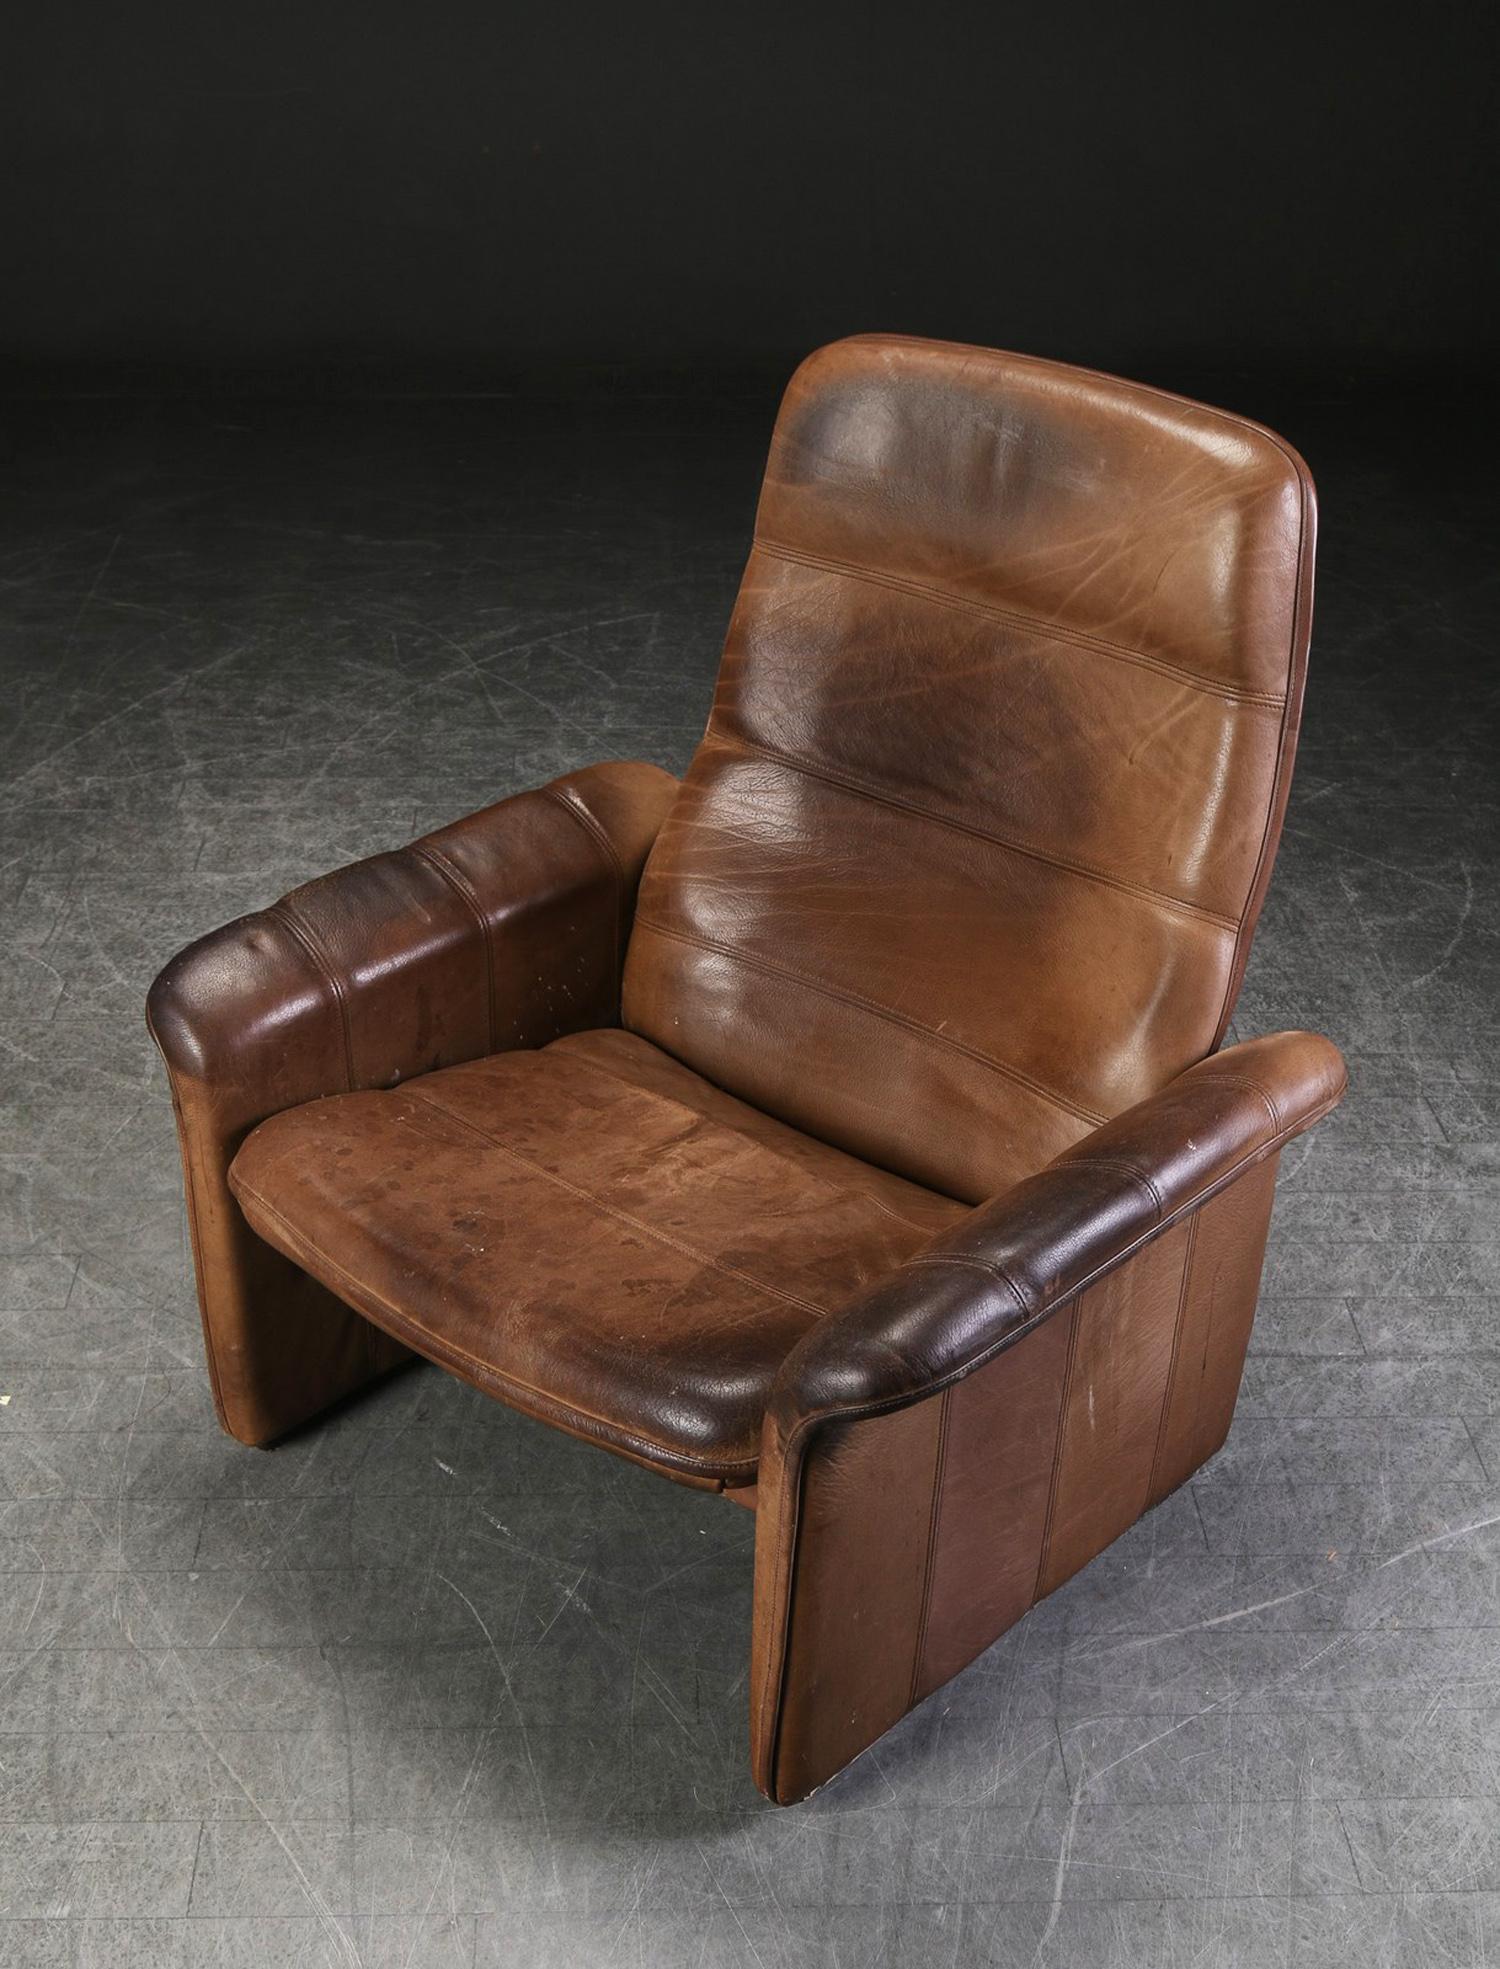 Heavy wood/steel adjustable construction covered with brown buffalo leather. Manufactured in Switzerland by De Sede in the early 1960s. 
Original used condition with great patina.